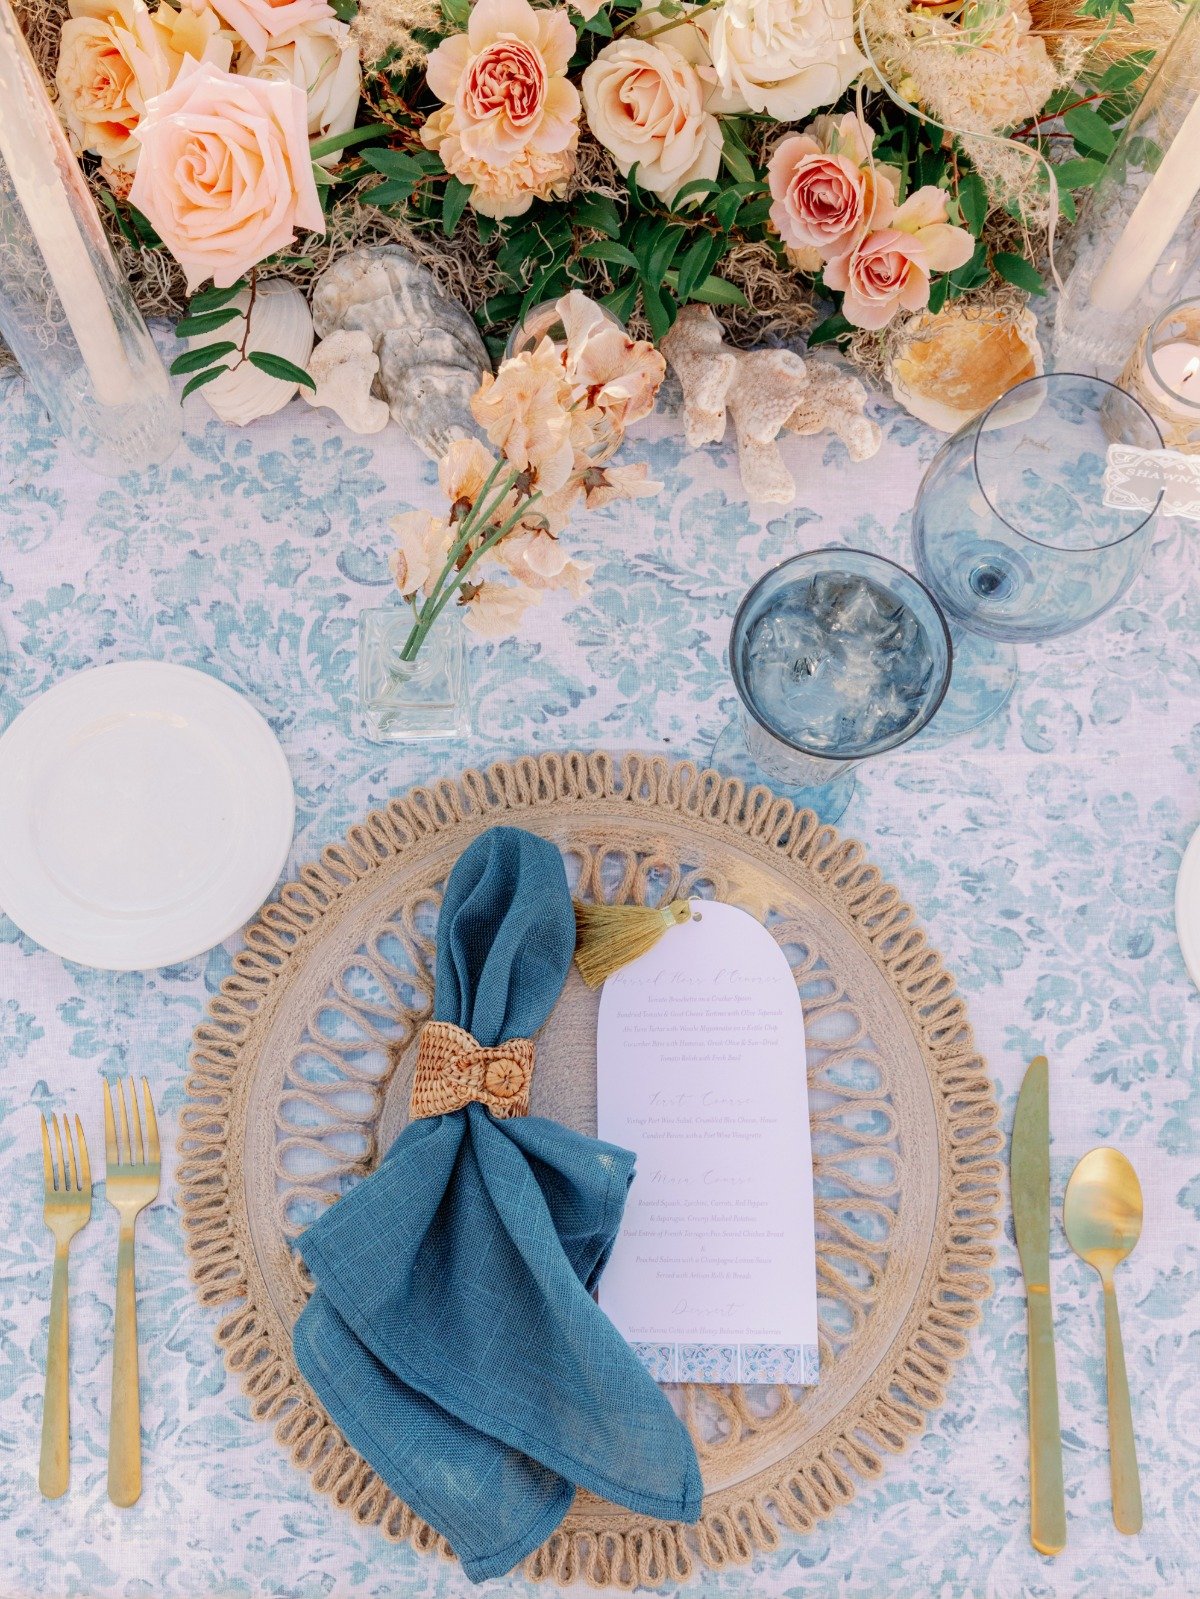 Oklahoma! Where the Sea Breeze Comes Sweeping Down the Plains for This Coastal-Inspired Rehearsal Dinner